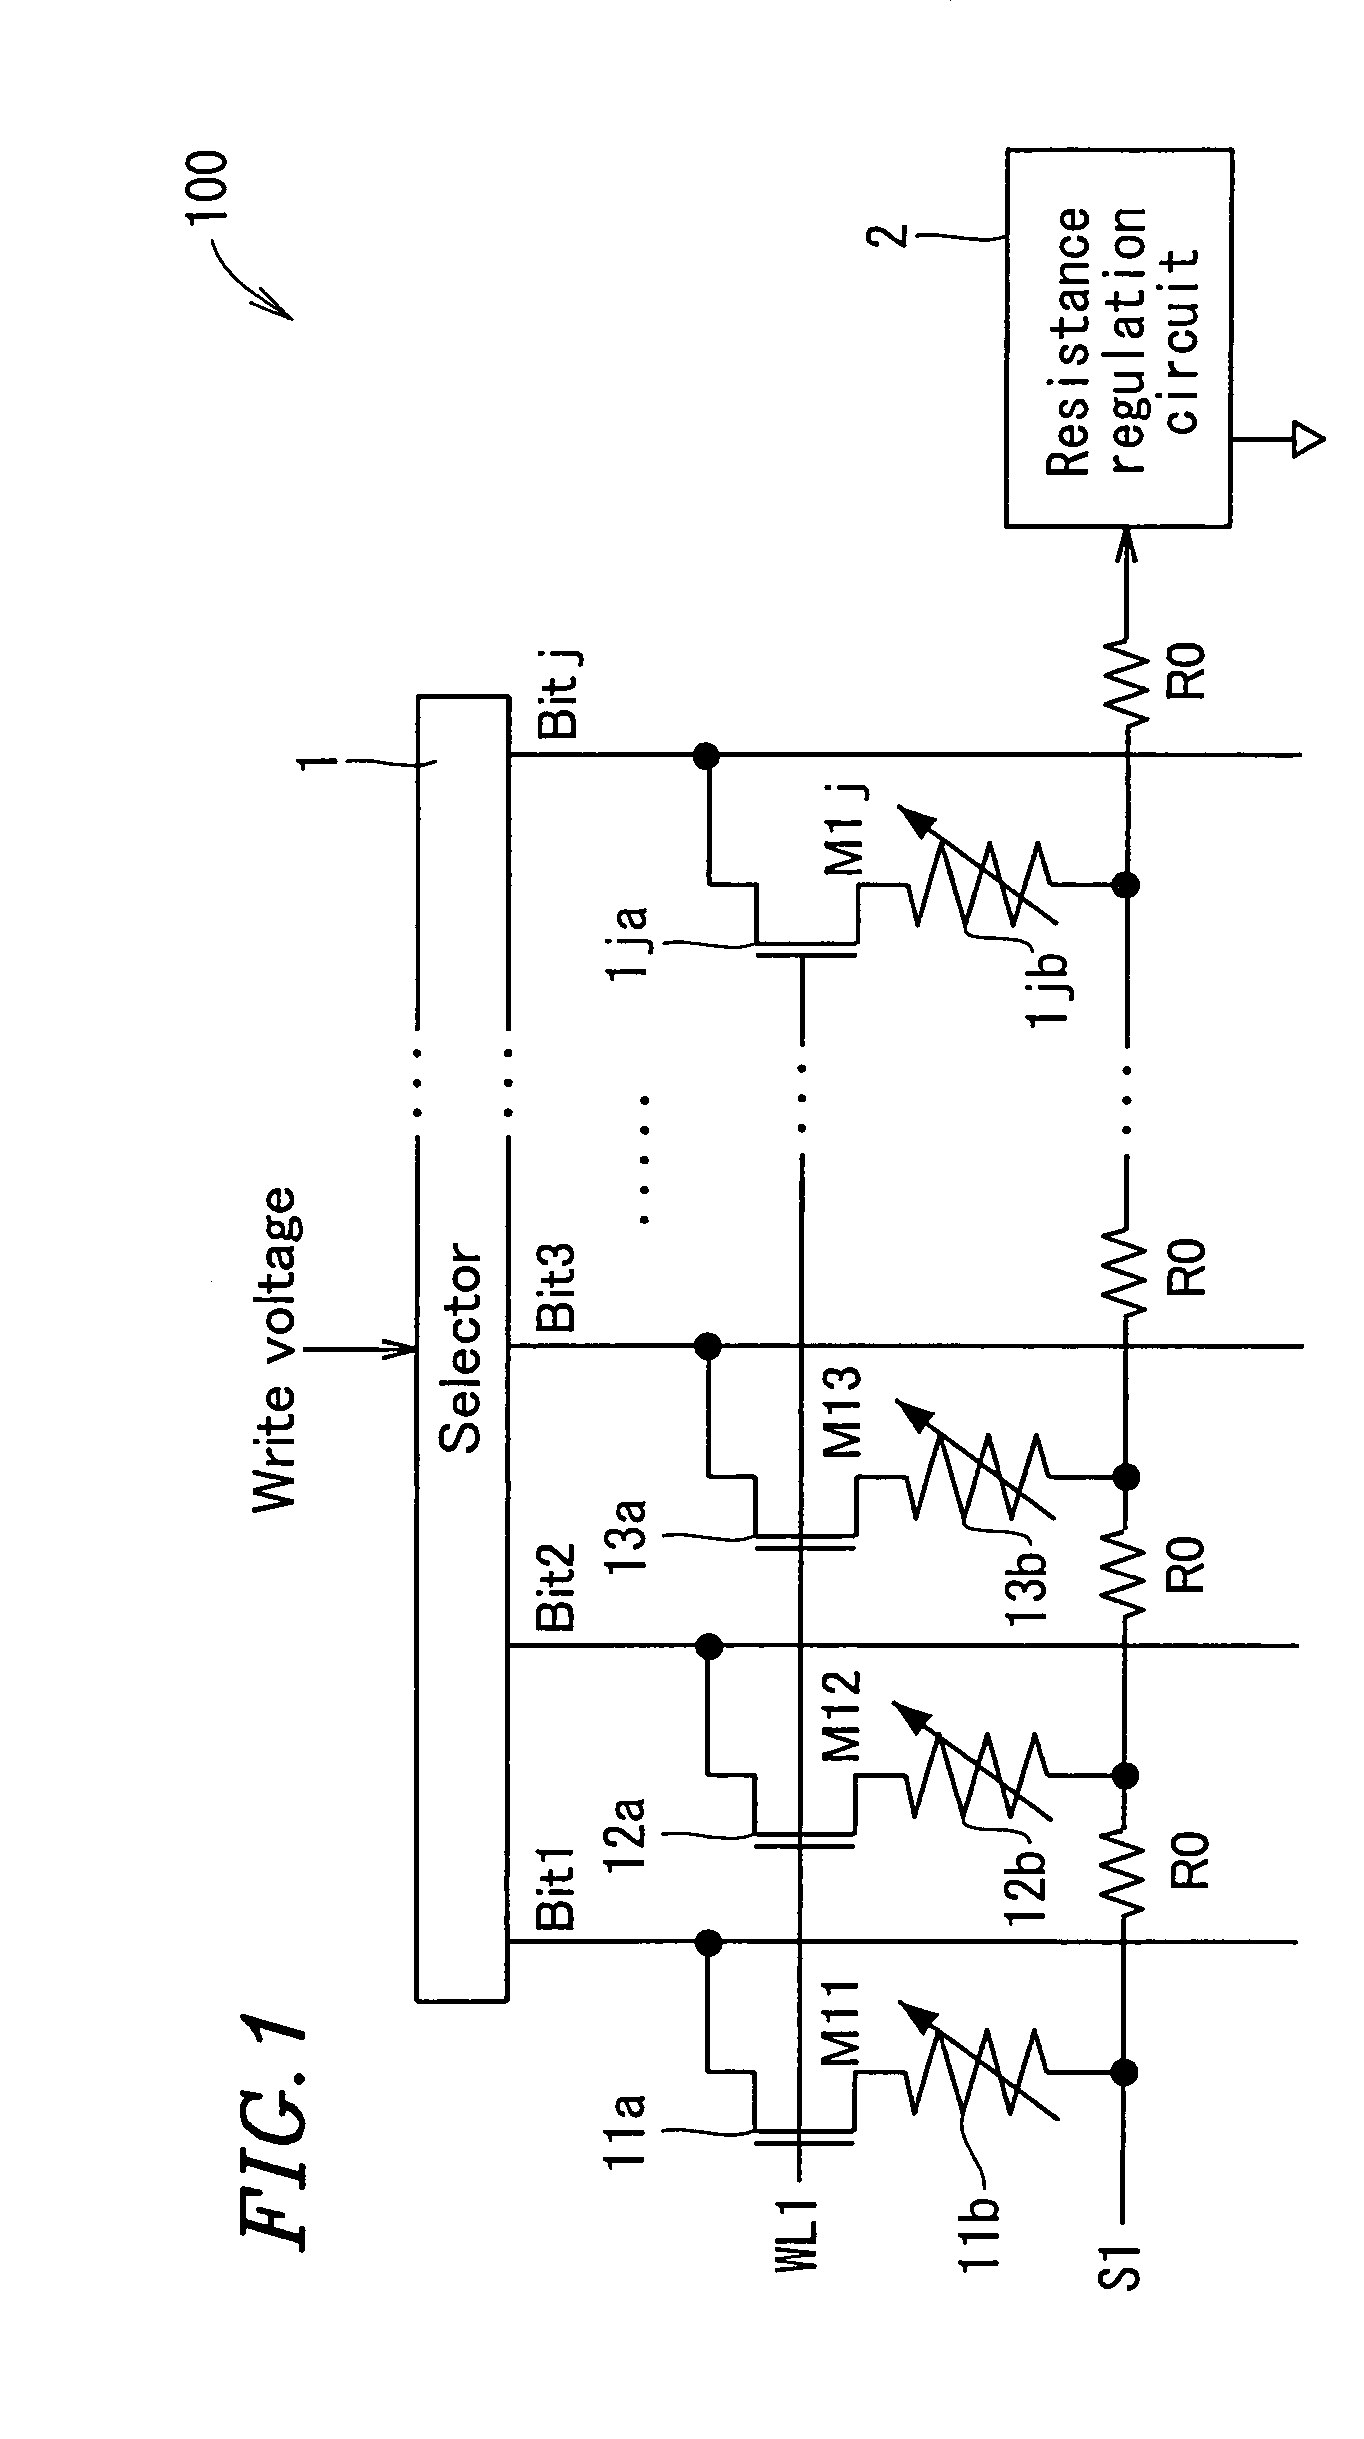 Nonvolatile semiconductor storage apparatus having reduced variance in resistance values of each of the storage states